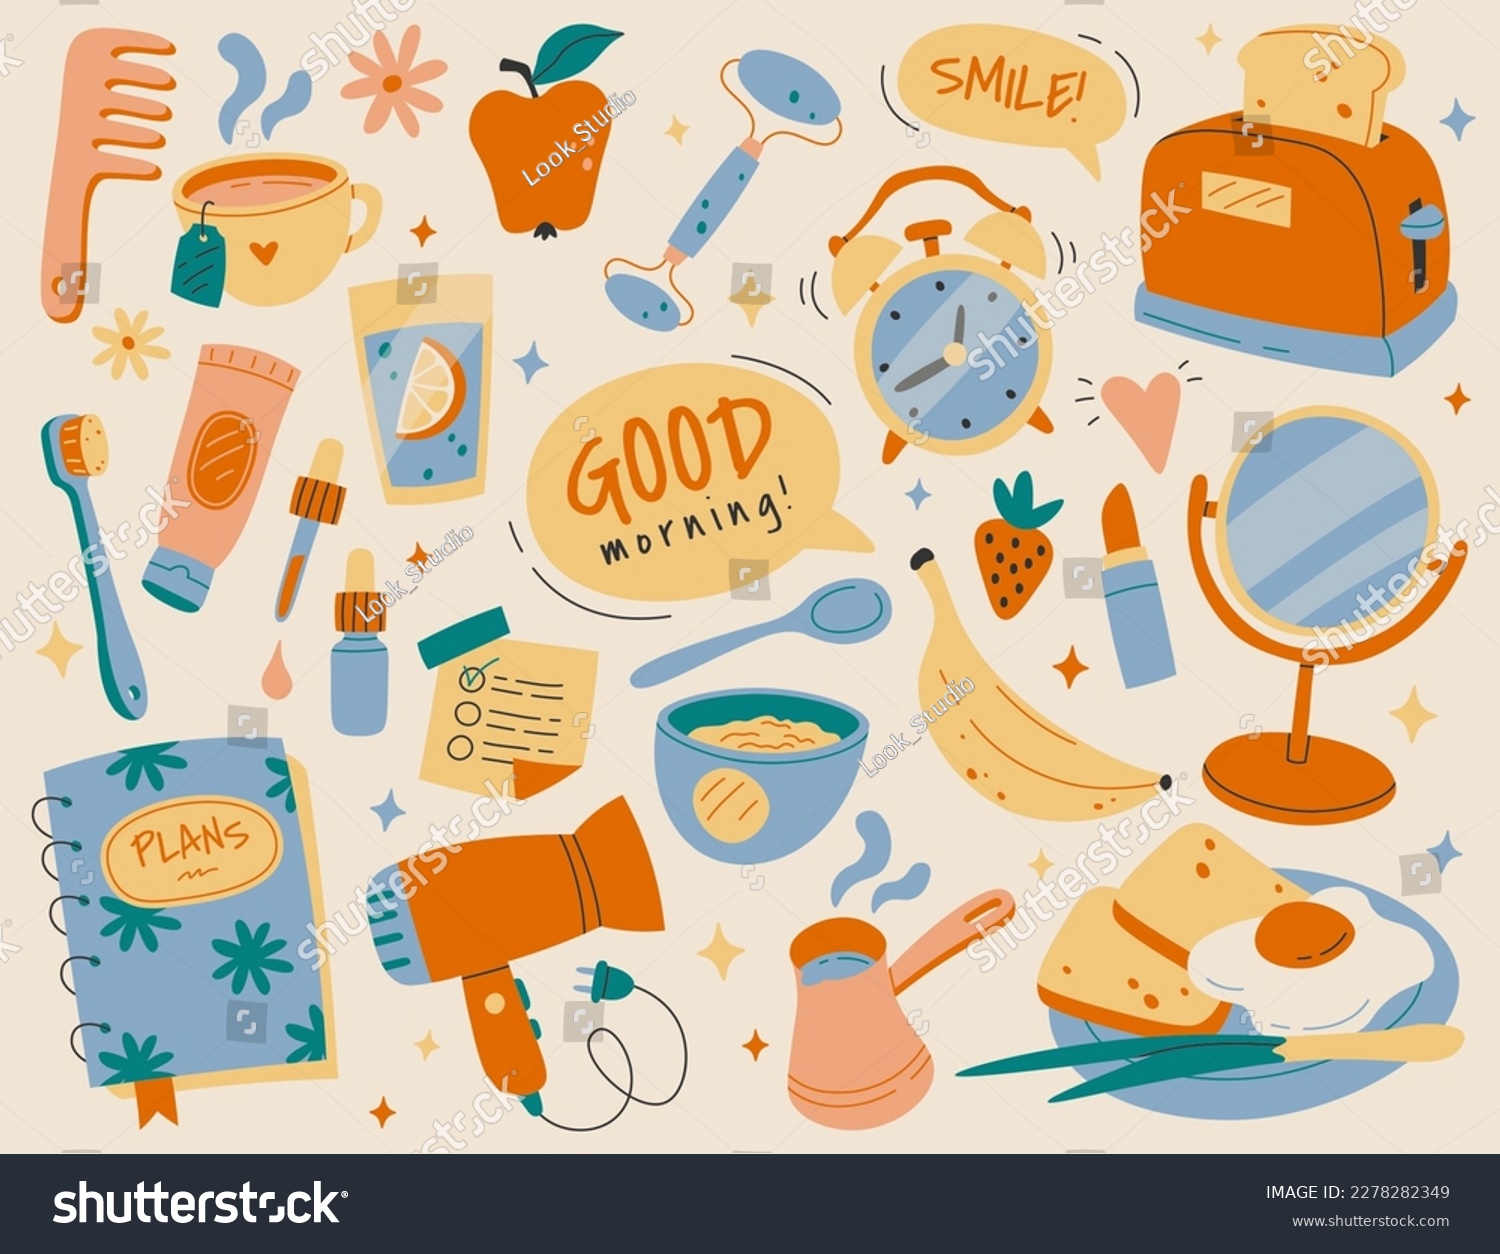 Morning routine elements flat icons set. Tasty and healthy food. Breakfast, wake up with alarm, beauty procedures. Color isolated illustration #2278282349